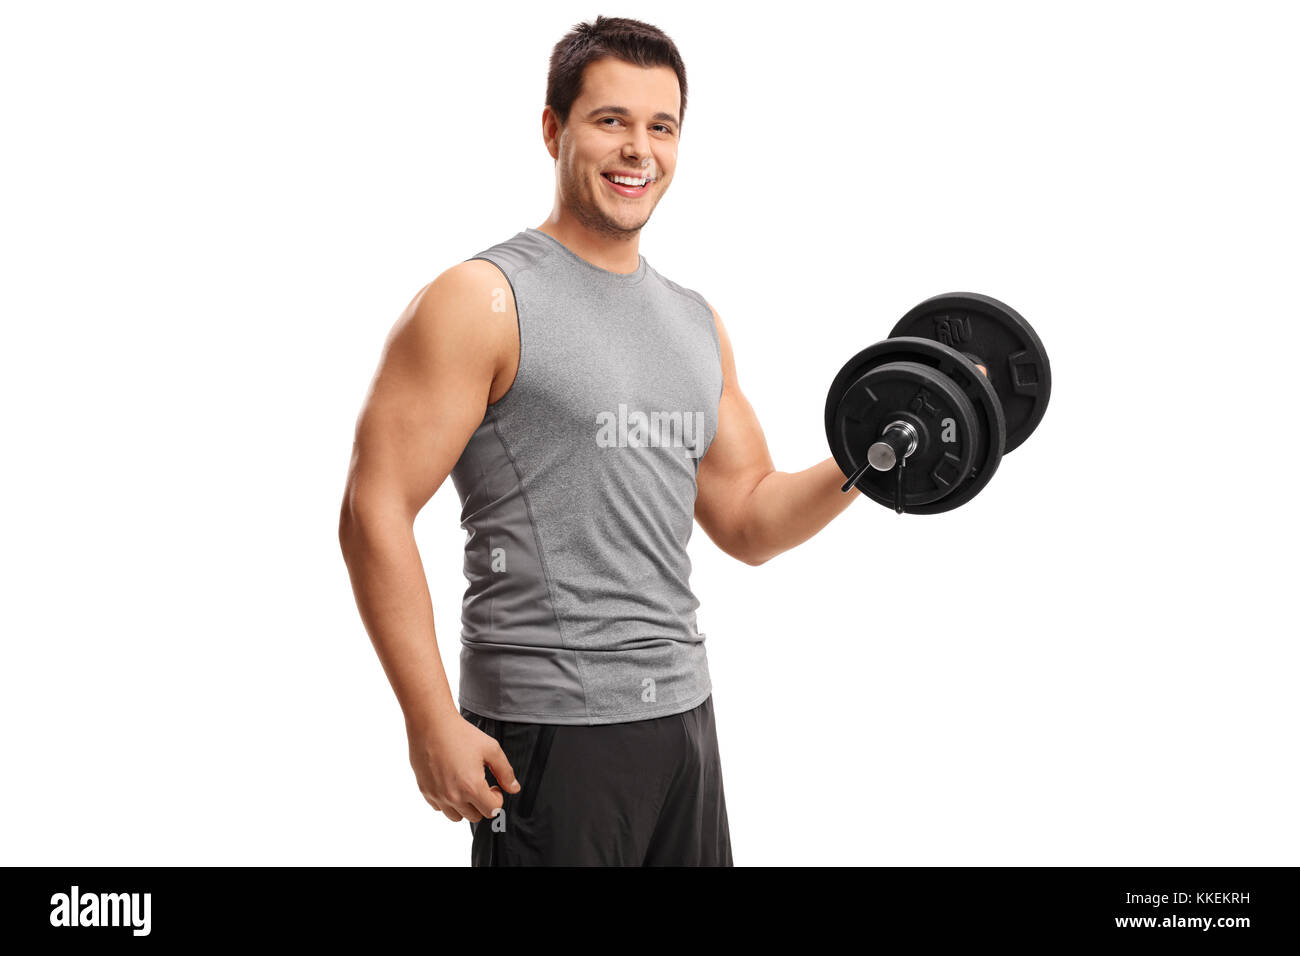 Man holding a dumbbell isolated on white background Stock Photo